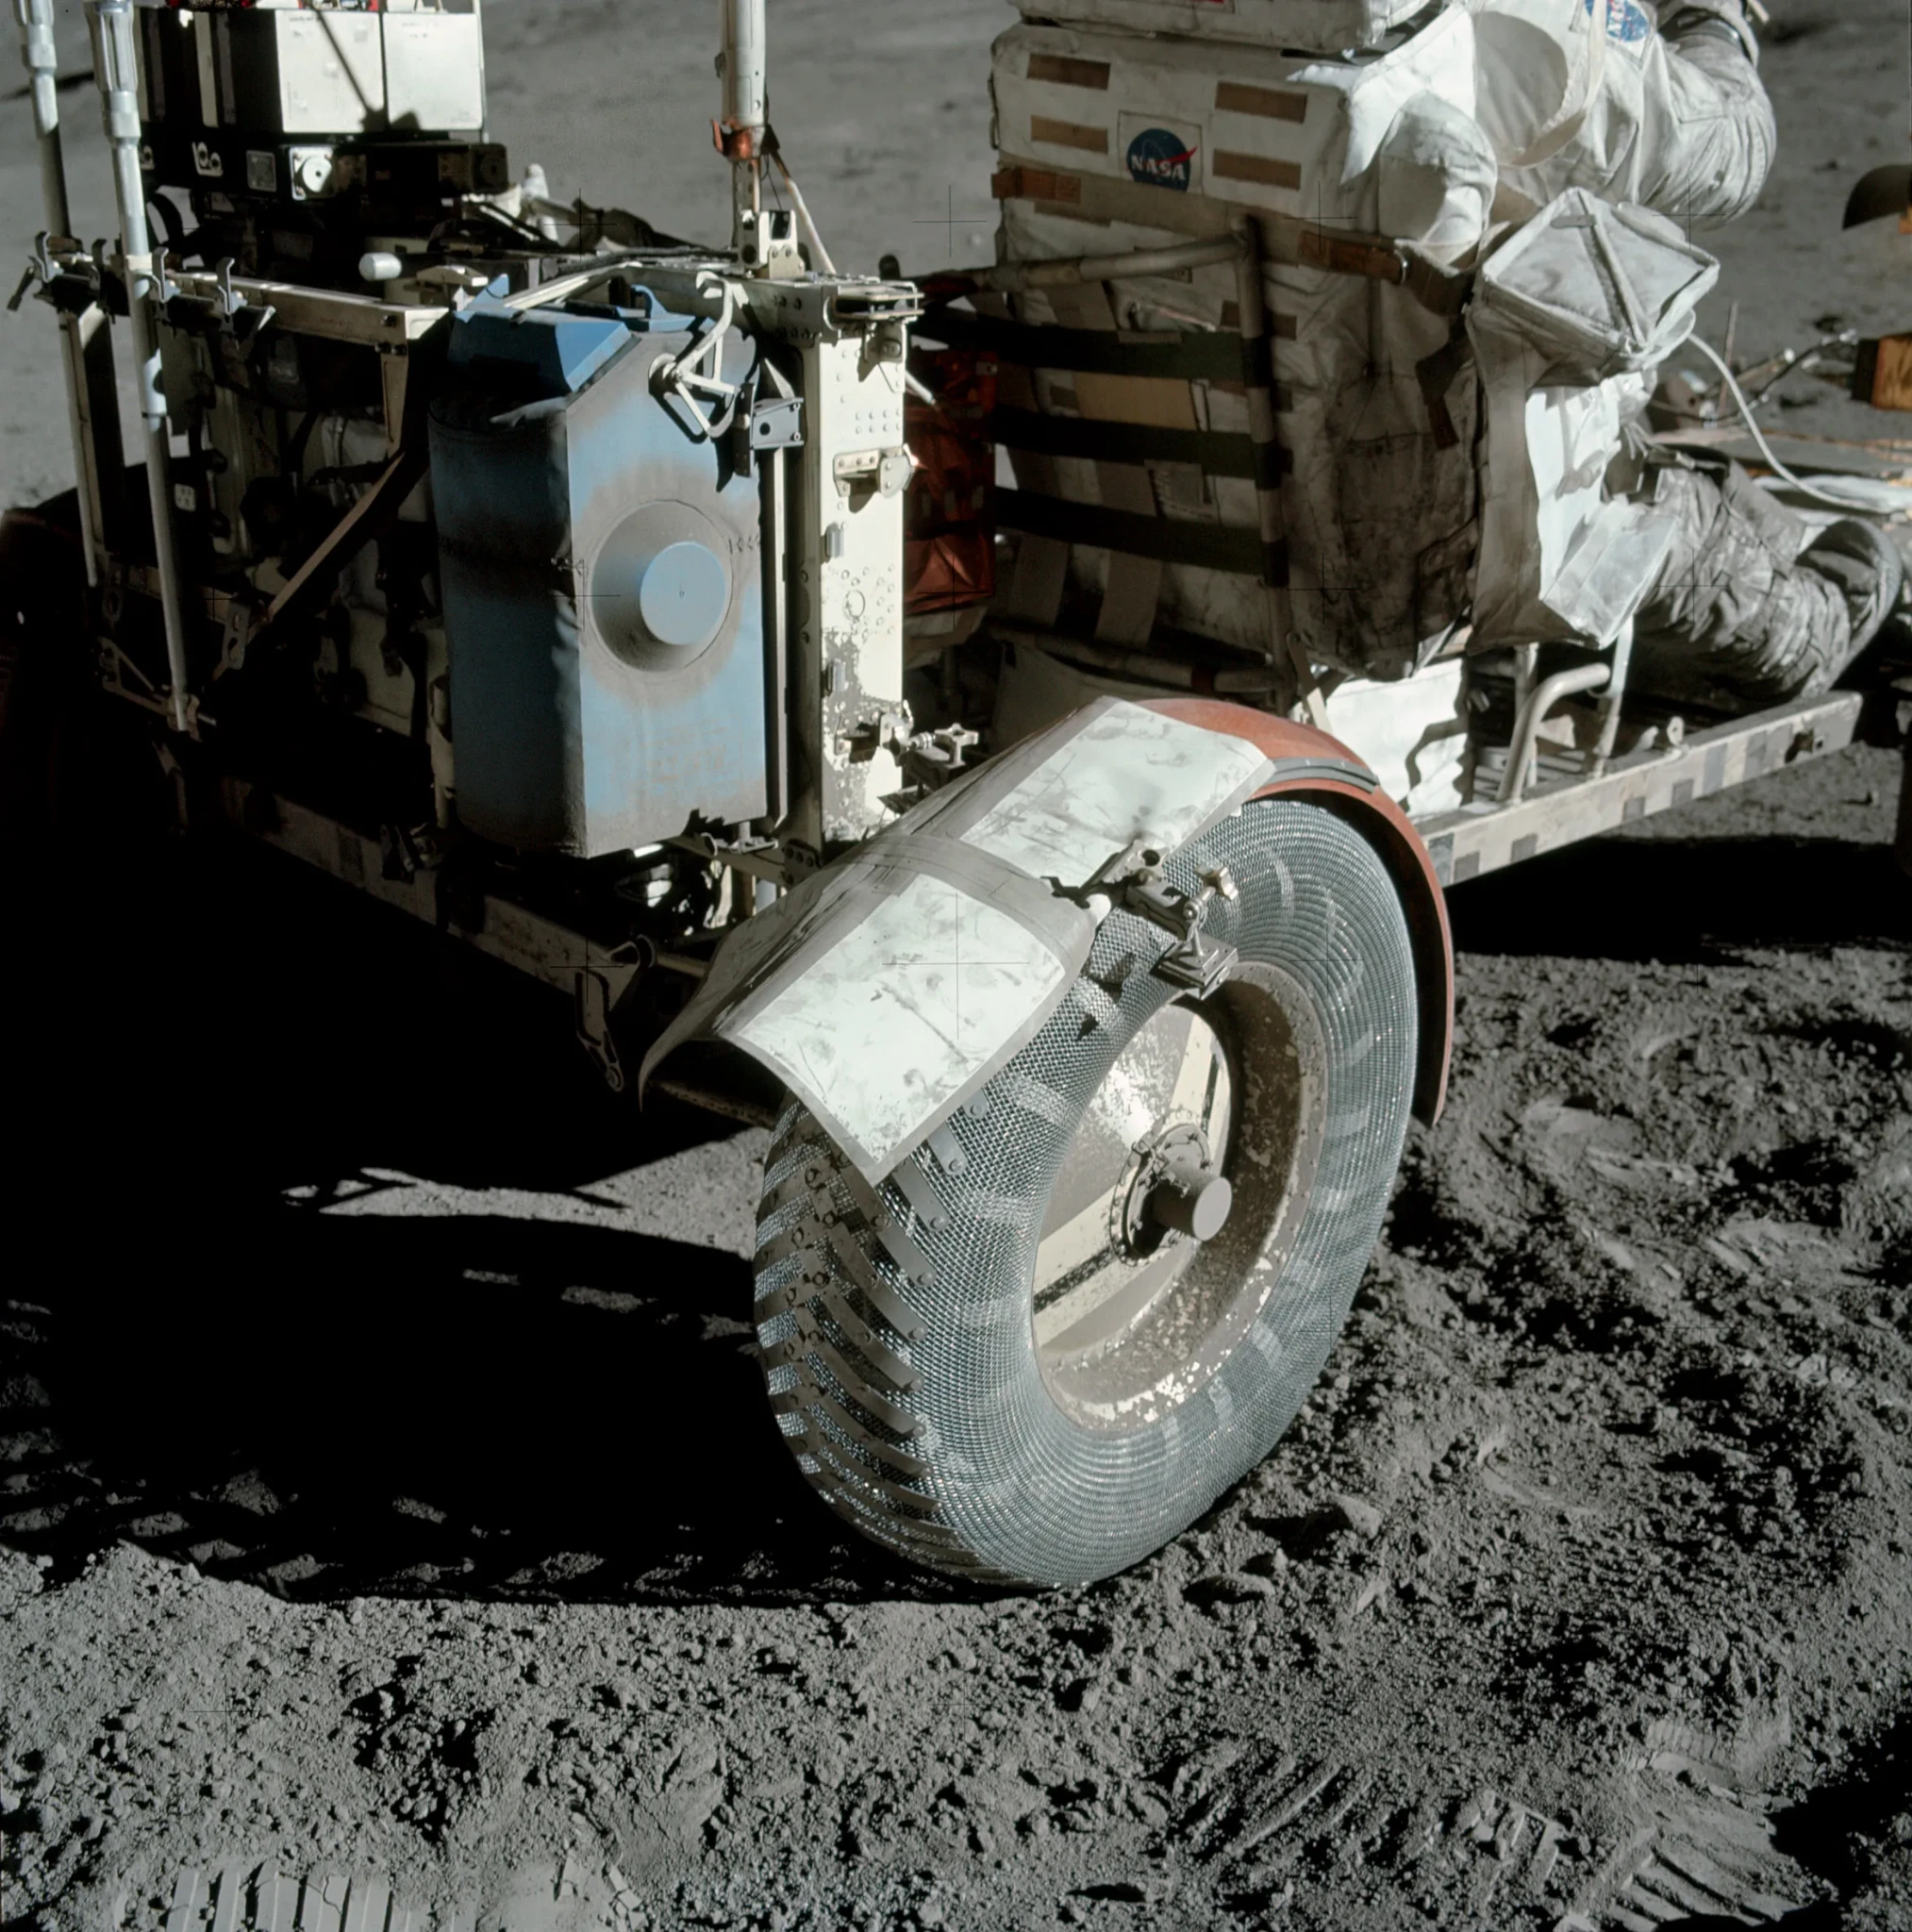 A photo of the lunar rover vehicle taken from behind, centered on the right rear wheel. A replacement fender is haphazardly attached. A dust-coated originally blue box is mounted above the wheel, and a suited up astronaut is driving the vehicle. The astronauts suit is also covered in lunar dust. https://www.nasa.gov/history/alsj/picture.html